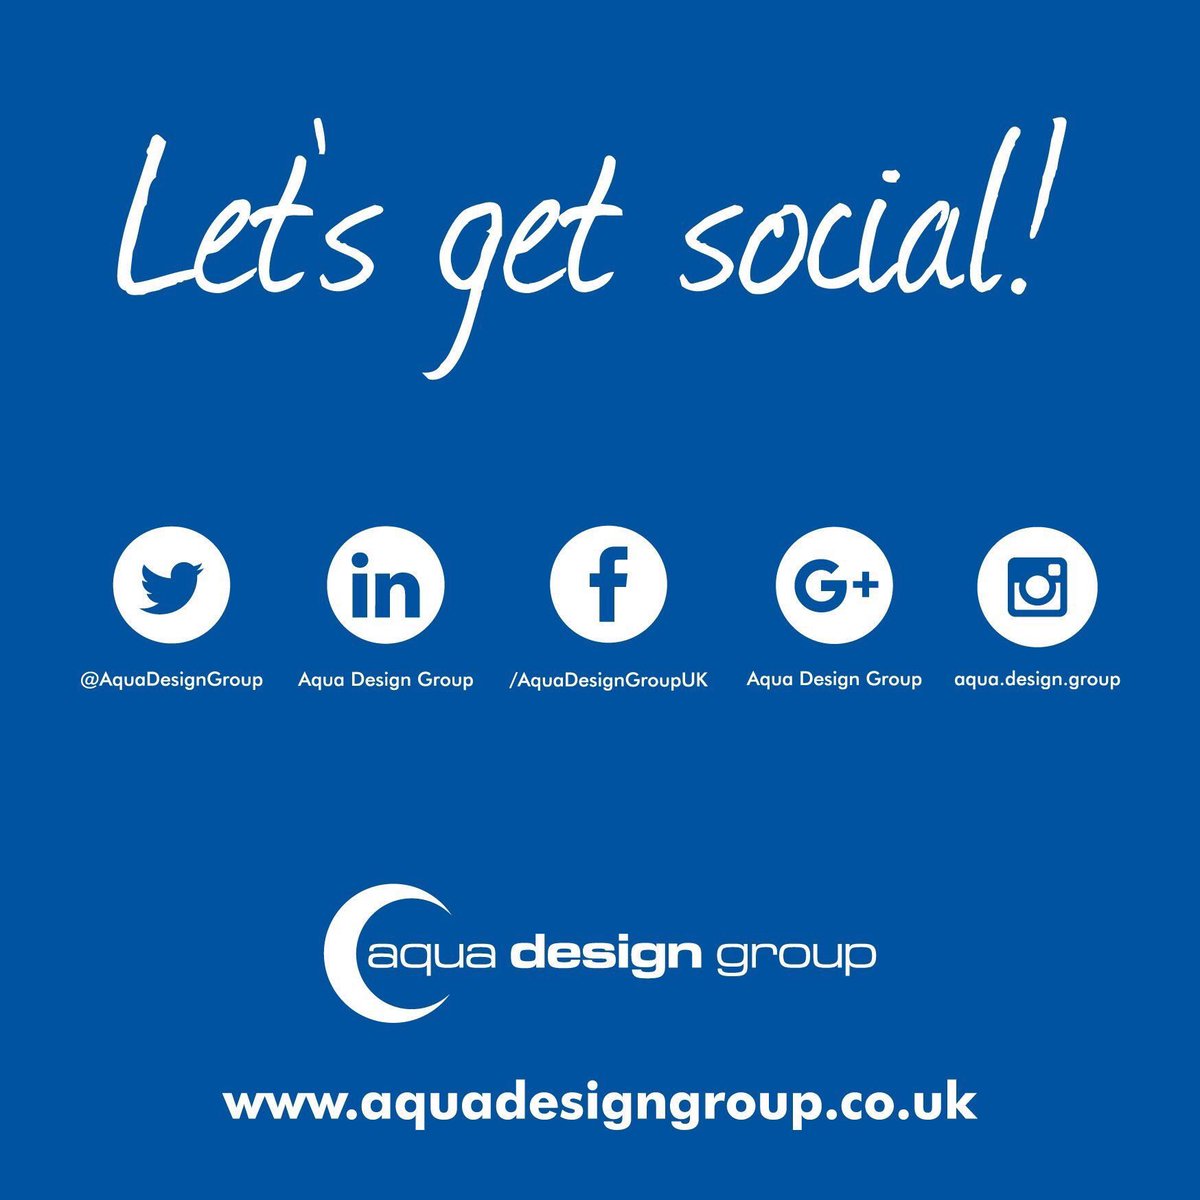 Let’s get social! Retweet on #Twitter, connect on #LinkedIn, follow on #Facebook, review on #Google and like on #Instagram 😊 #Stockport #Cheshire #NorthWest #ShopIndie #BizBubble #elevenseshour   aquadesigngroup.co.uk